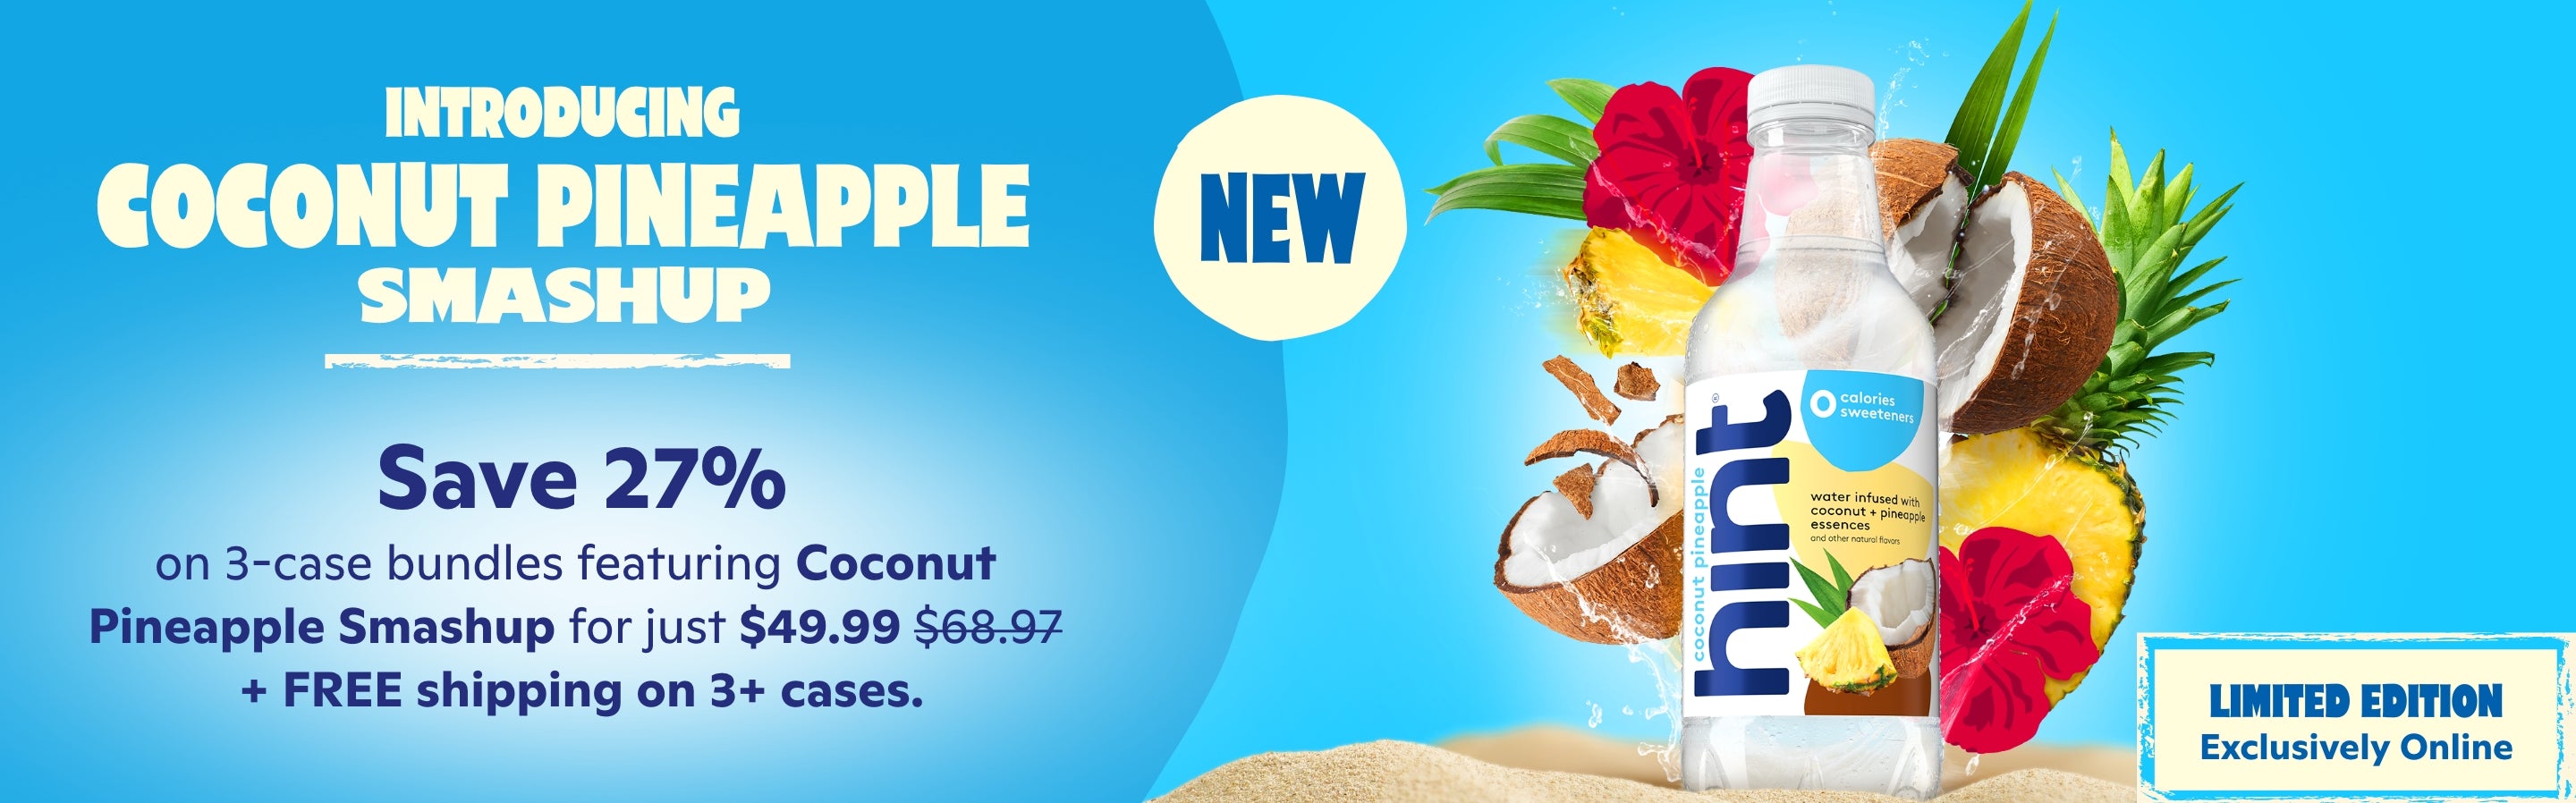 <h1> Introducing Coconut Pineapple Smashup</h1> <h2> </h2> <p><br> Save 27% on 3-case bundles featuring Coconut Pineapple for just $49.99 + FREE shipping </p>